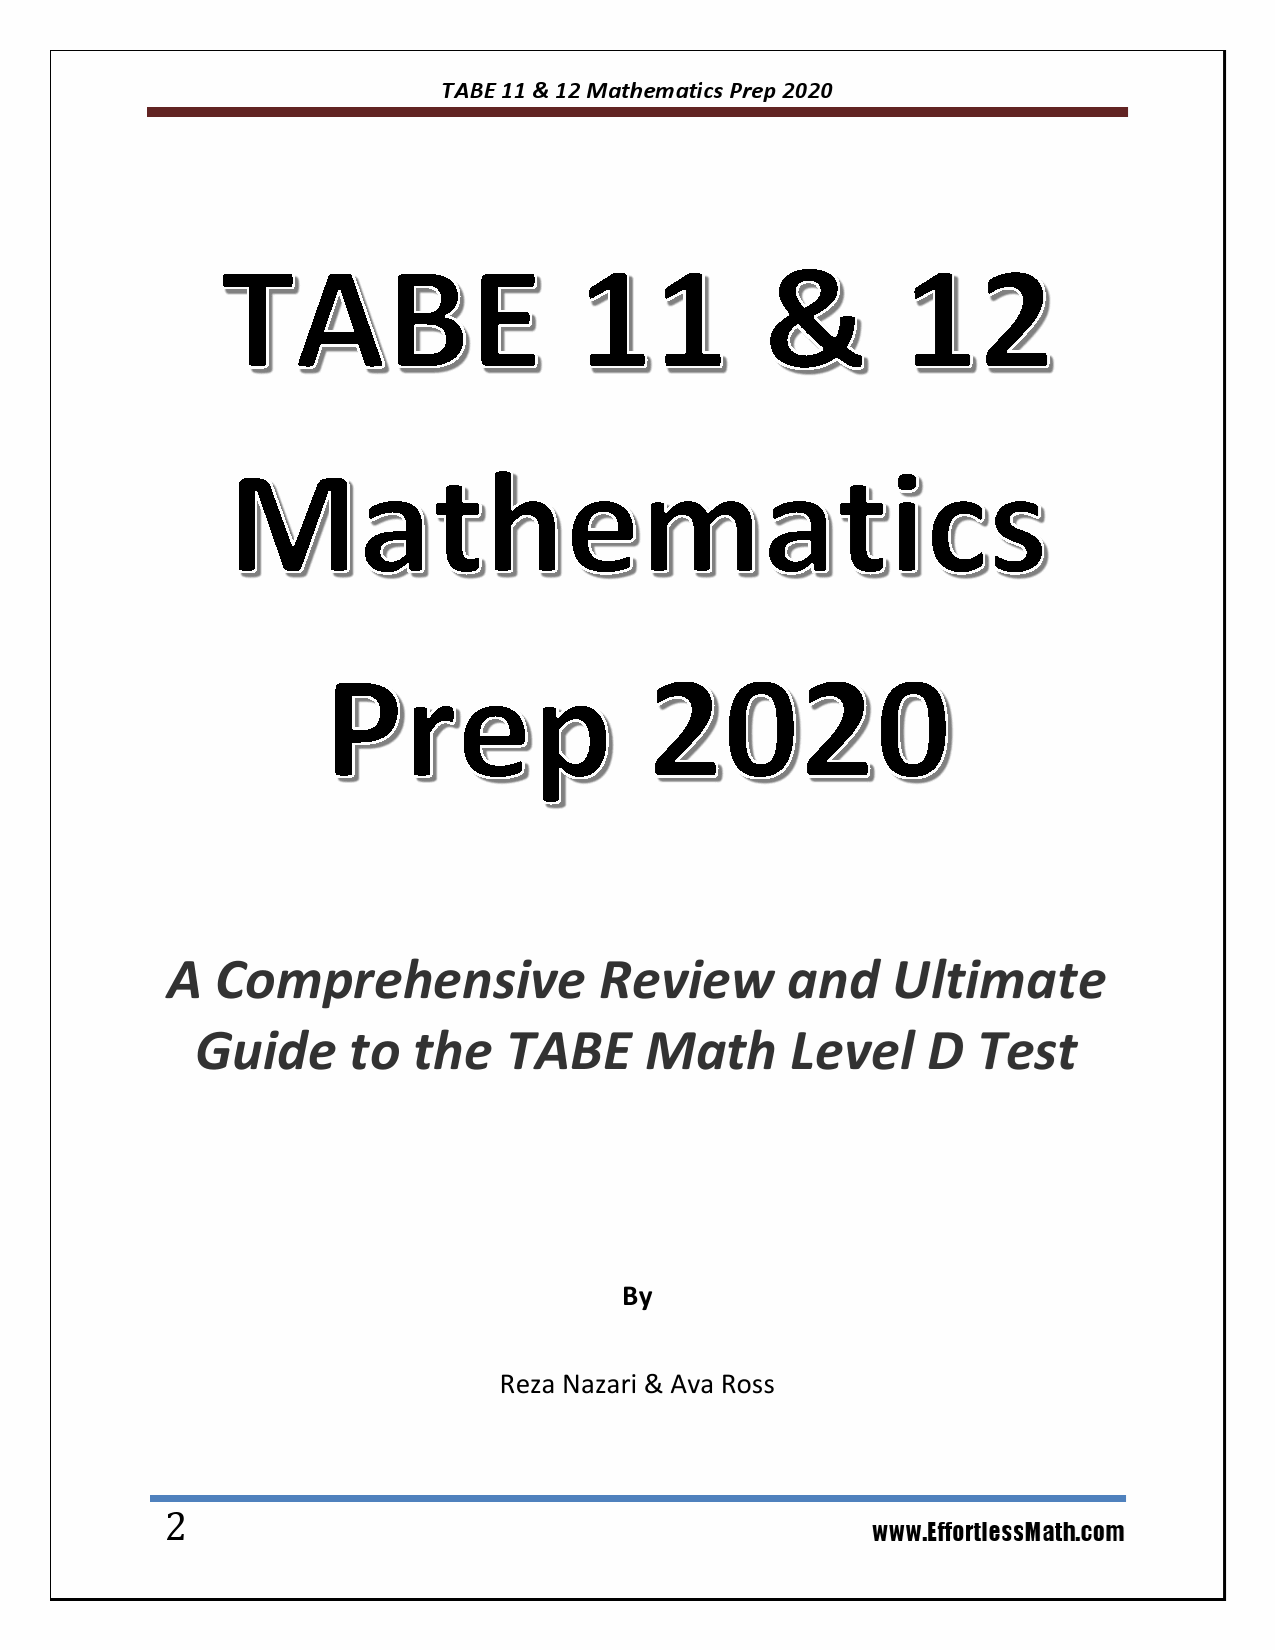 tabe-mathematics-prep-2019-a-comprehensive-review-and-ultimate-guide-to-the-tabe-math-test